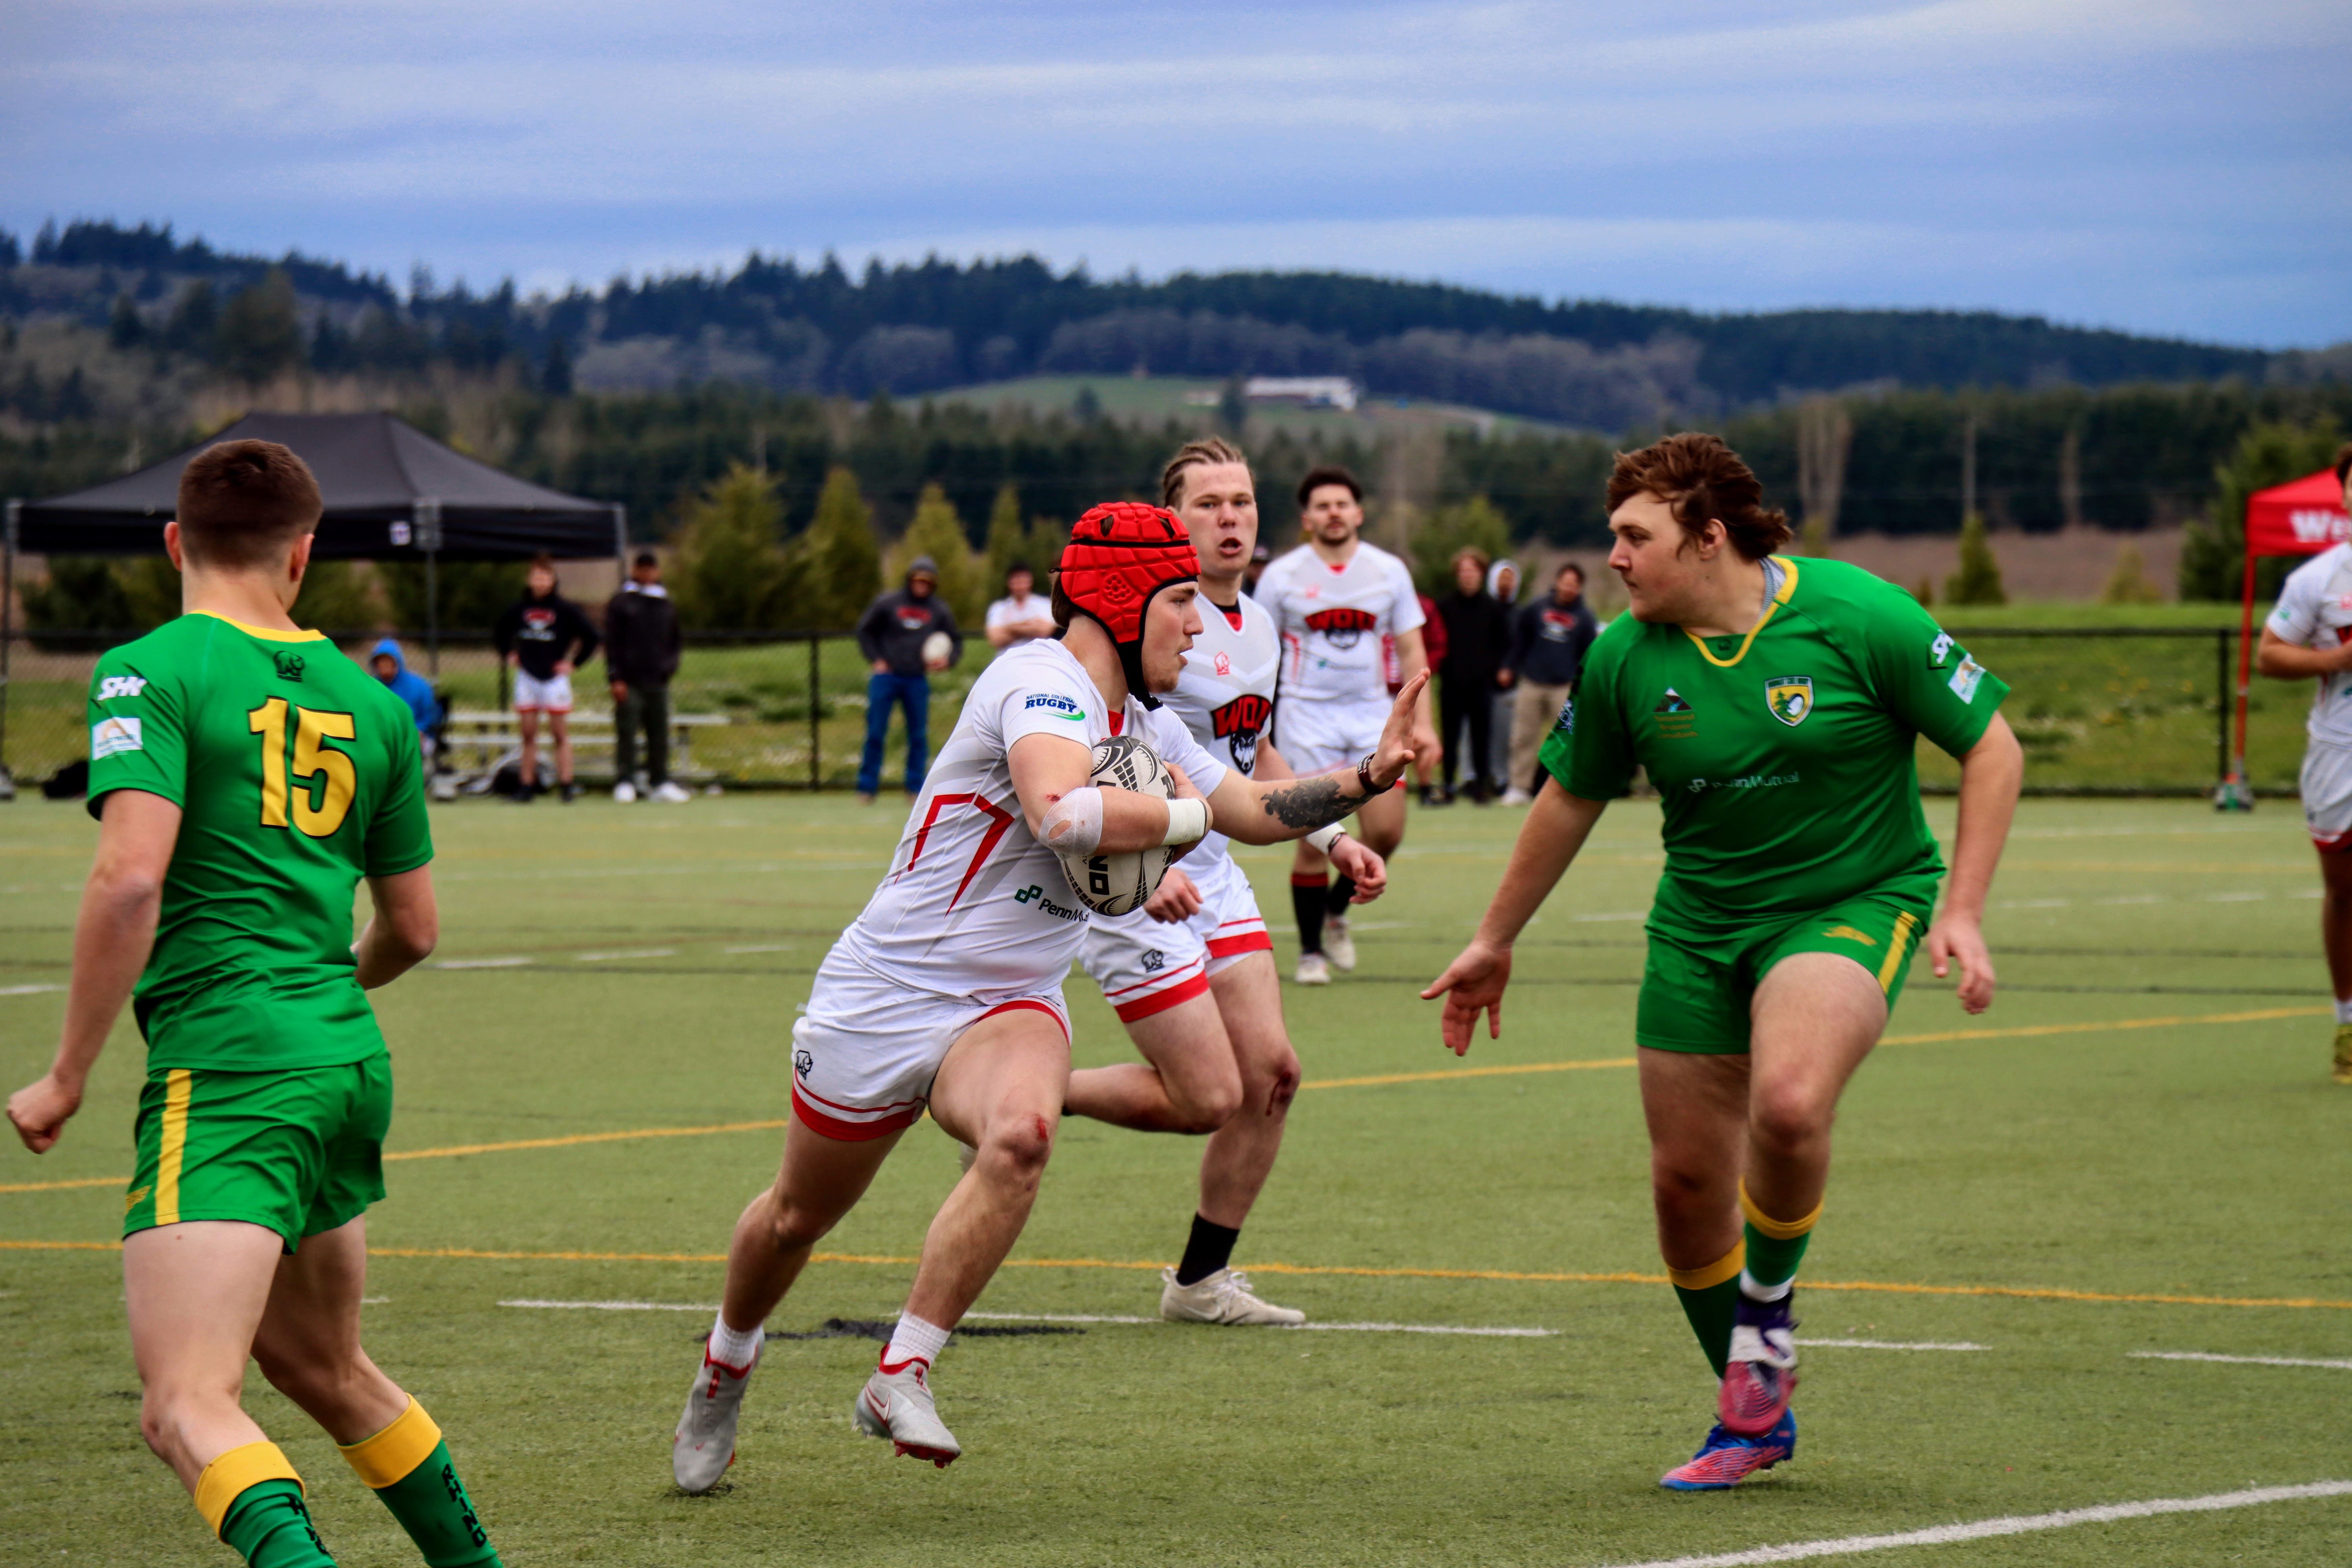 Men’s rugby ranked 17 in Coach’s poll